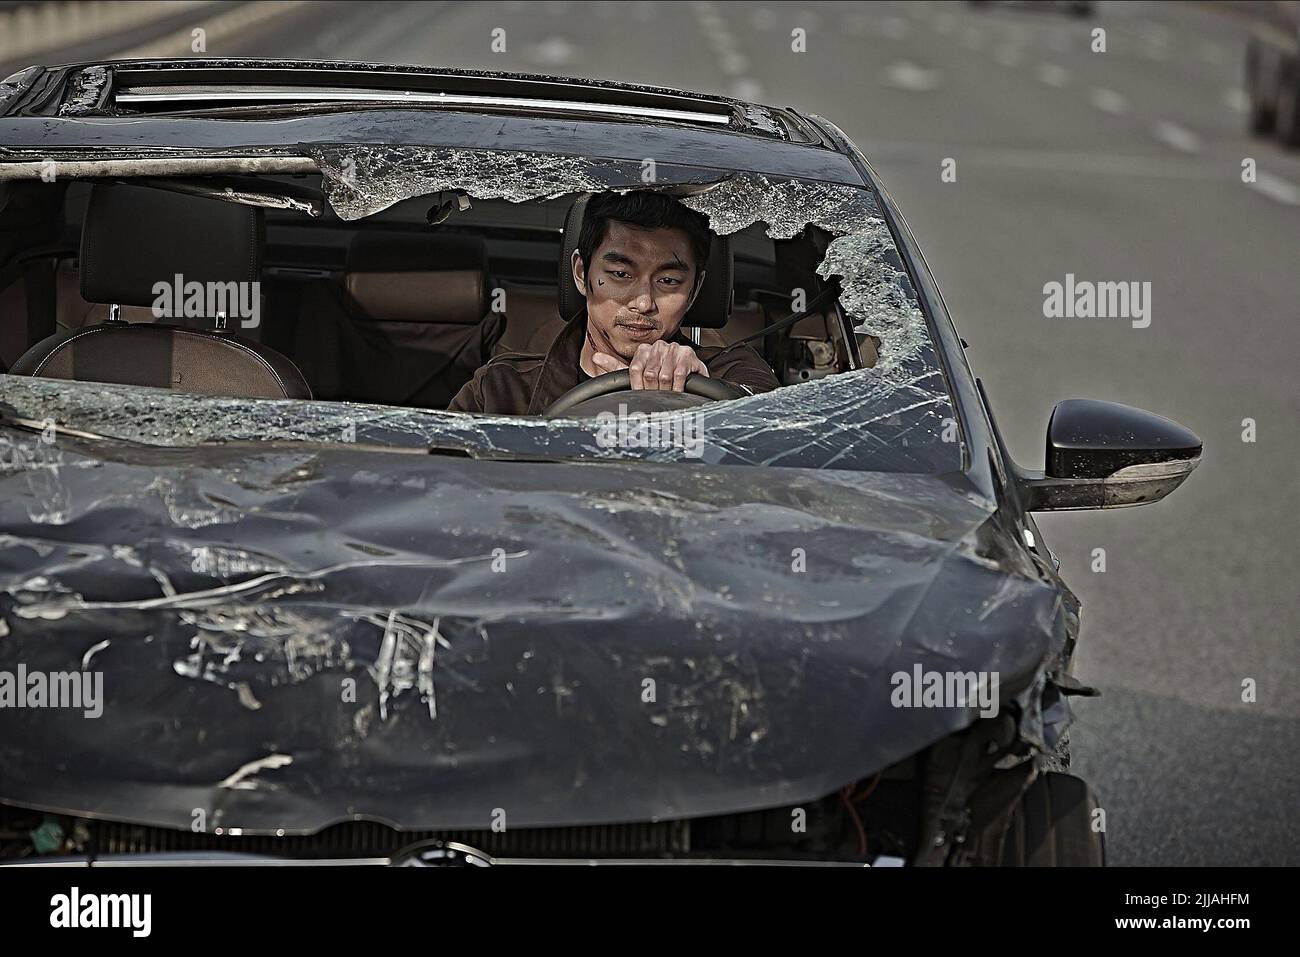 YOO GONG, THE SUSPECT, 2013 Stock Photo